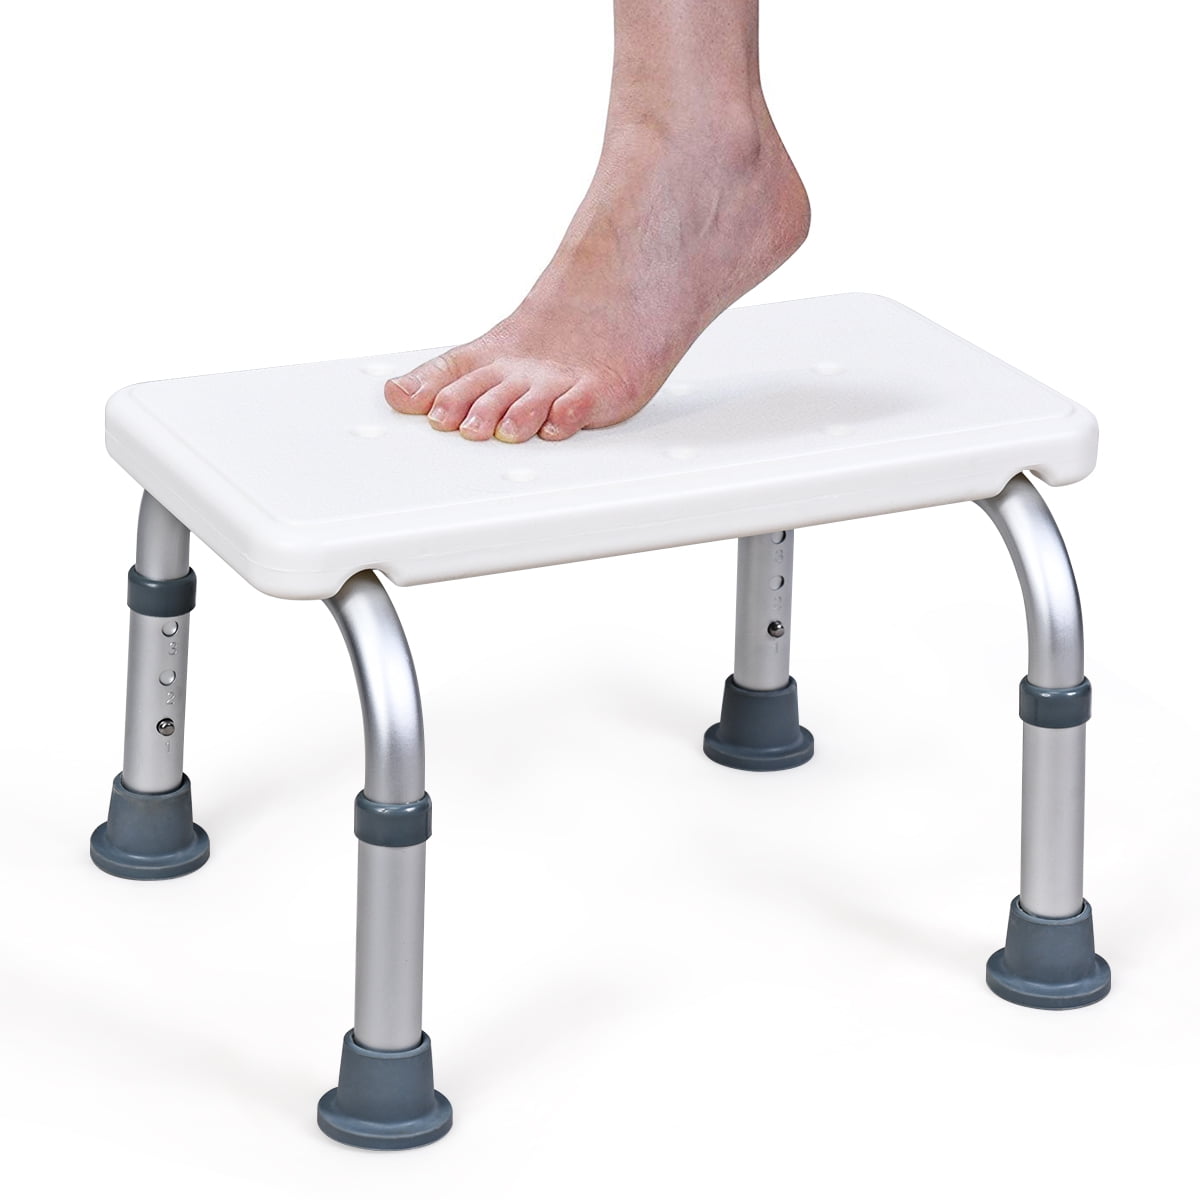 Costway Bath Step Stool Adjustable Kitchen Stepping Stool For